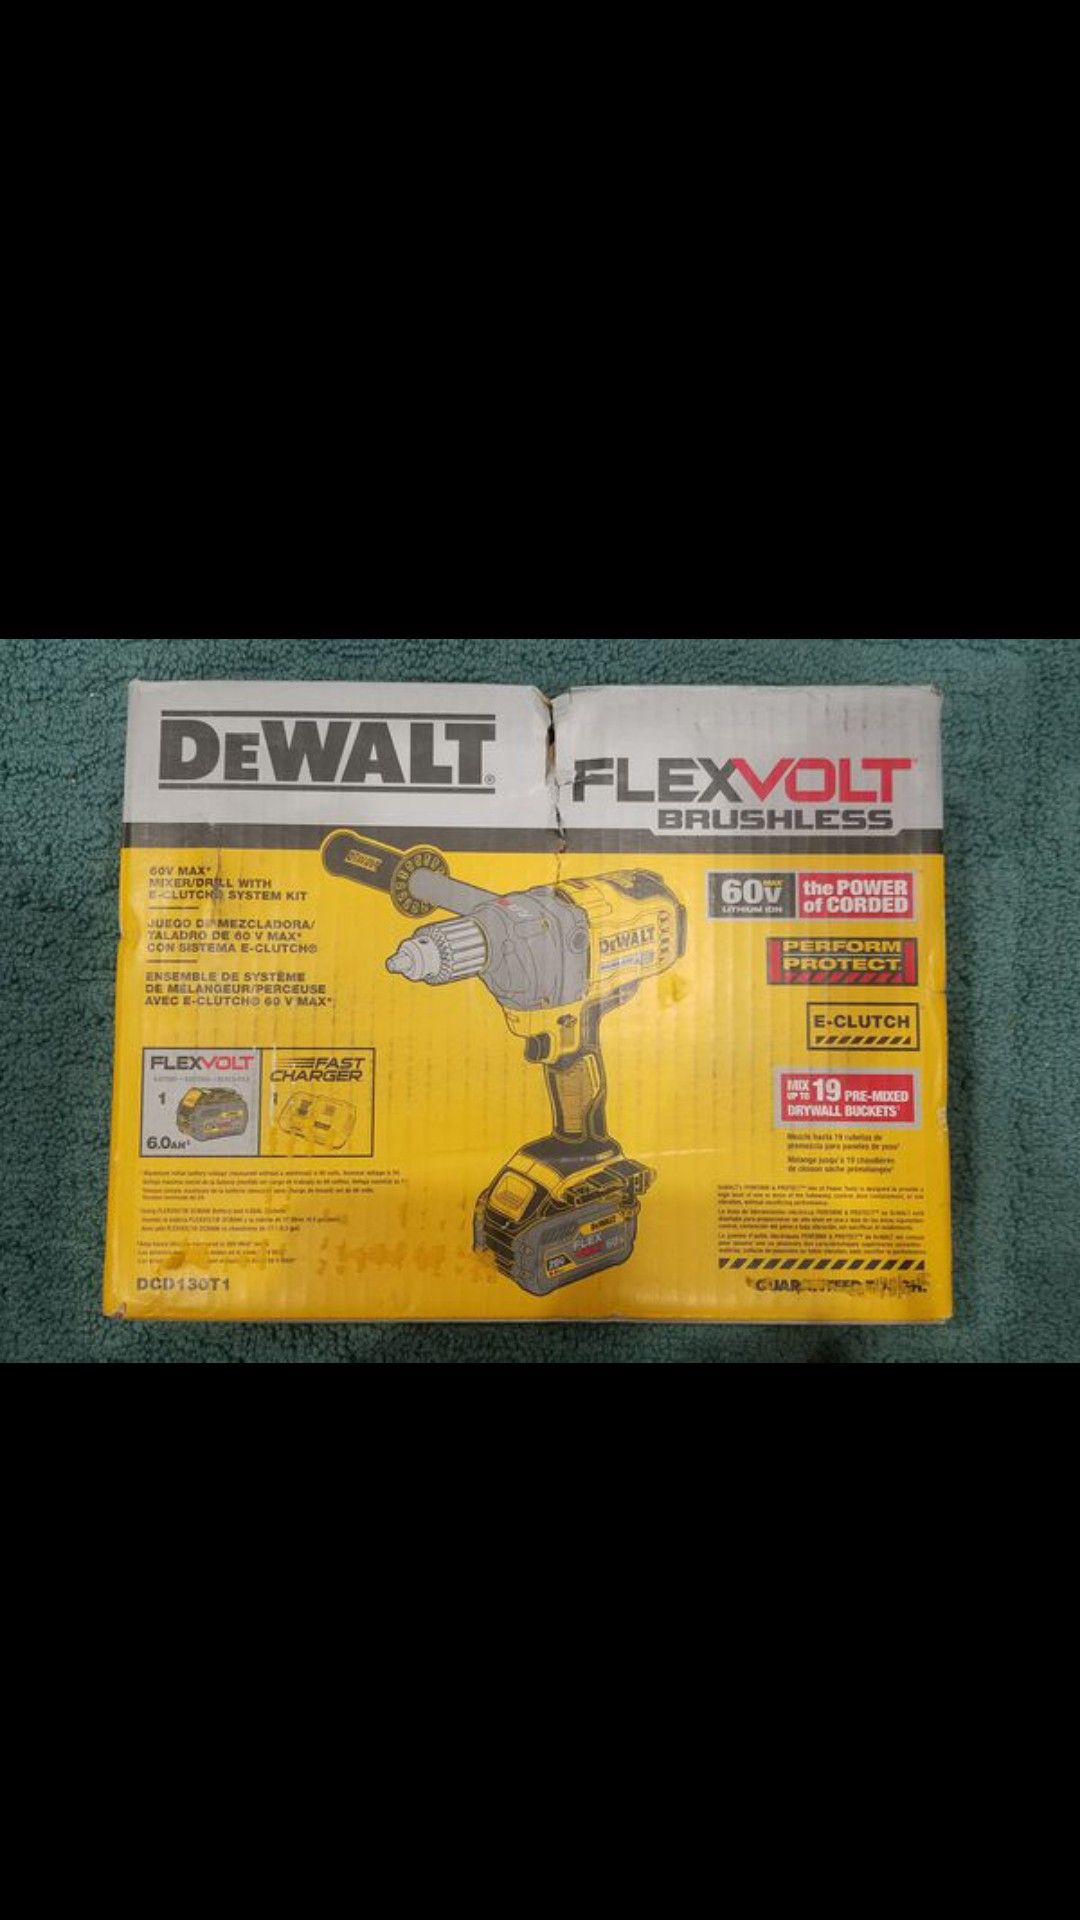 DEWALT 60V MAX MIXER/DRILL WITH E-CLUCH SYSTEM KIT CON BATERIA 6.0 AH AND FAST CHARGER...NUEVO...